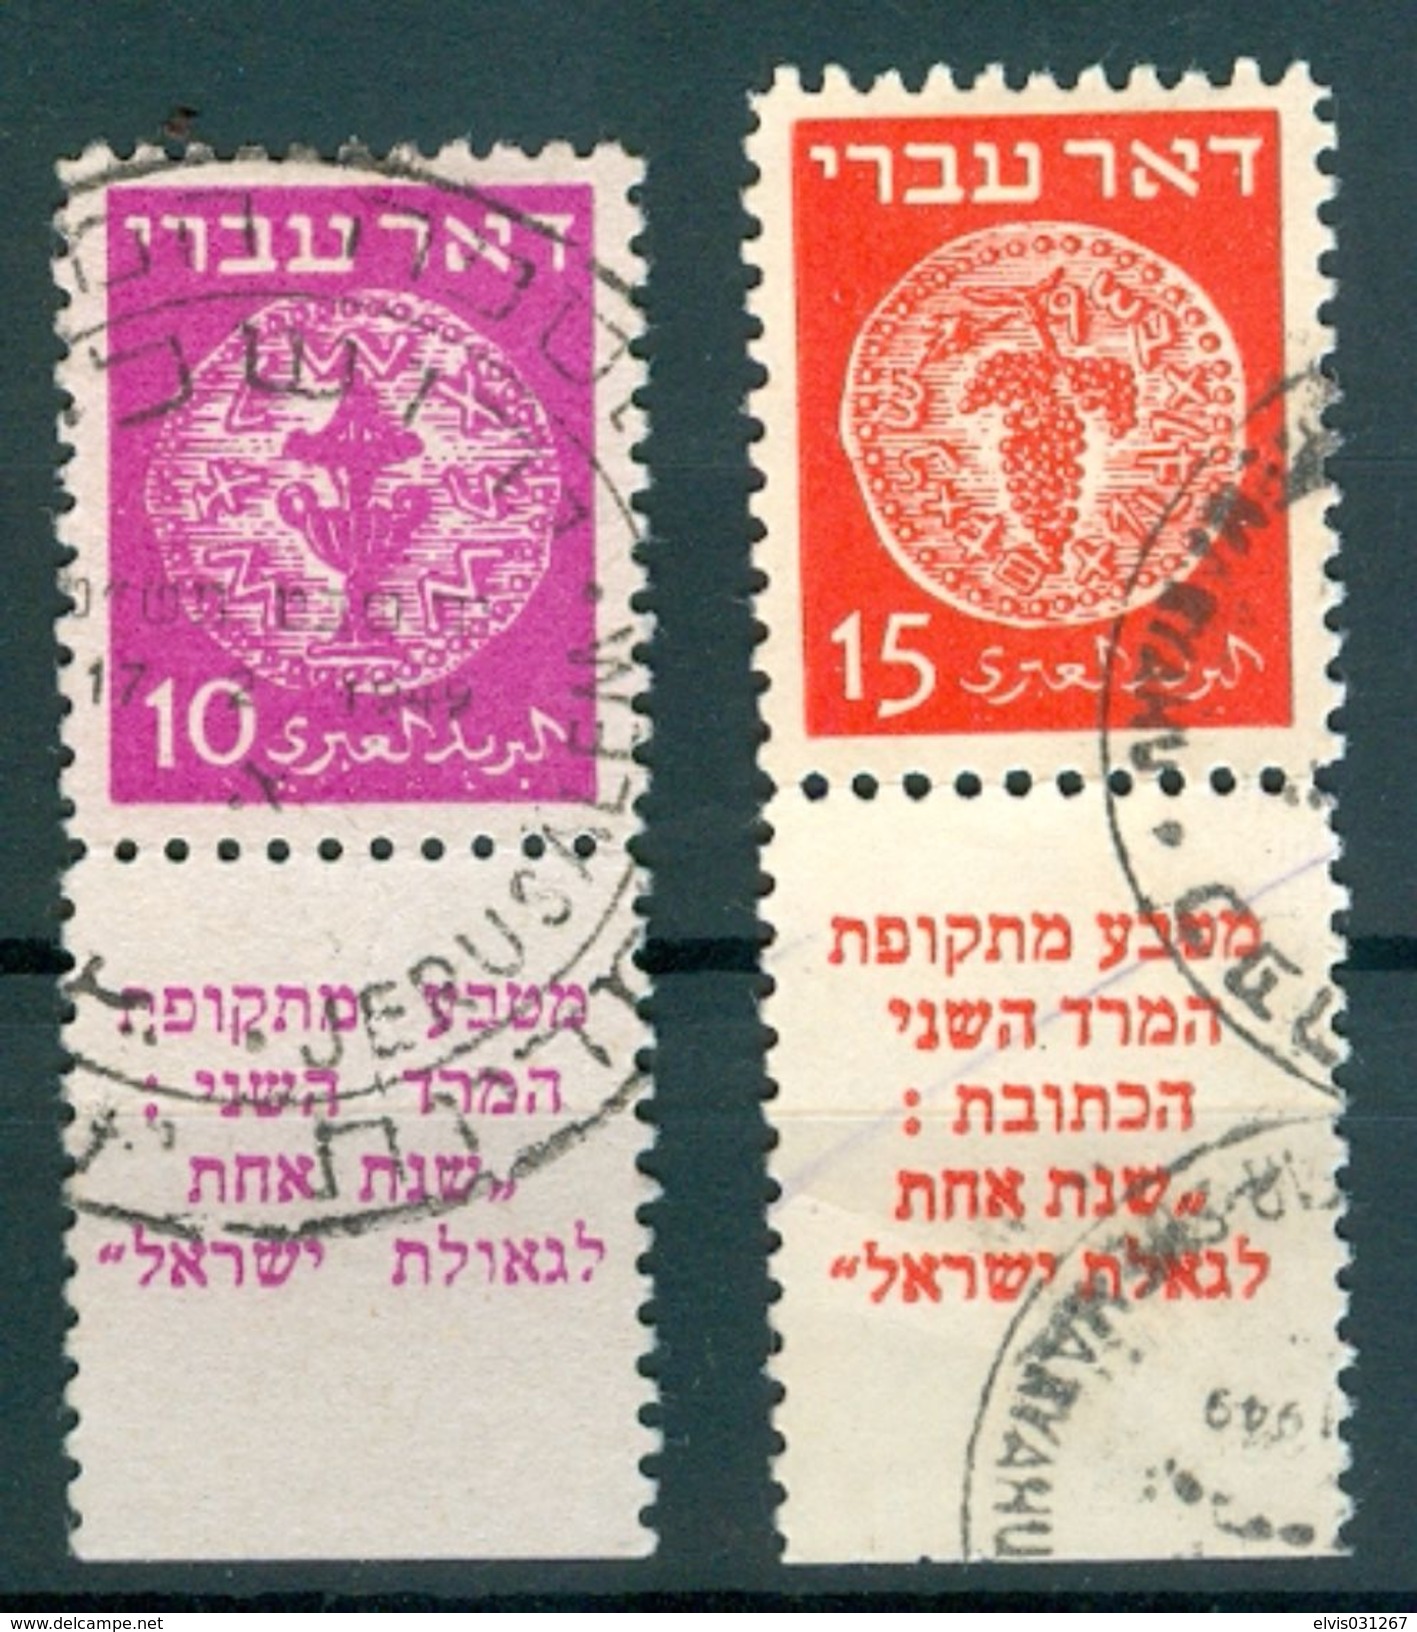 Israel - 1948, Michel/Philex No. : 3-4, WRONG TAB DESCRIPTION, Perf: 11/11 - USED - *** - Full Tab - Imperforates, Proofs & Errors